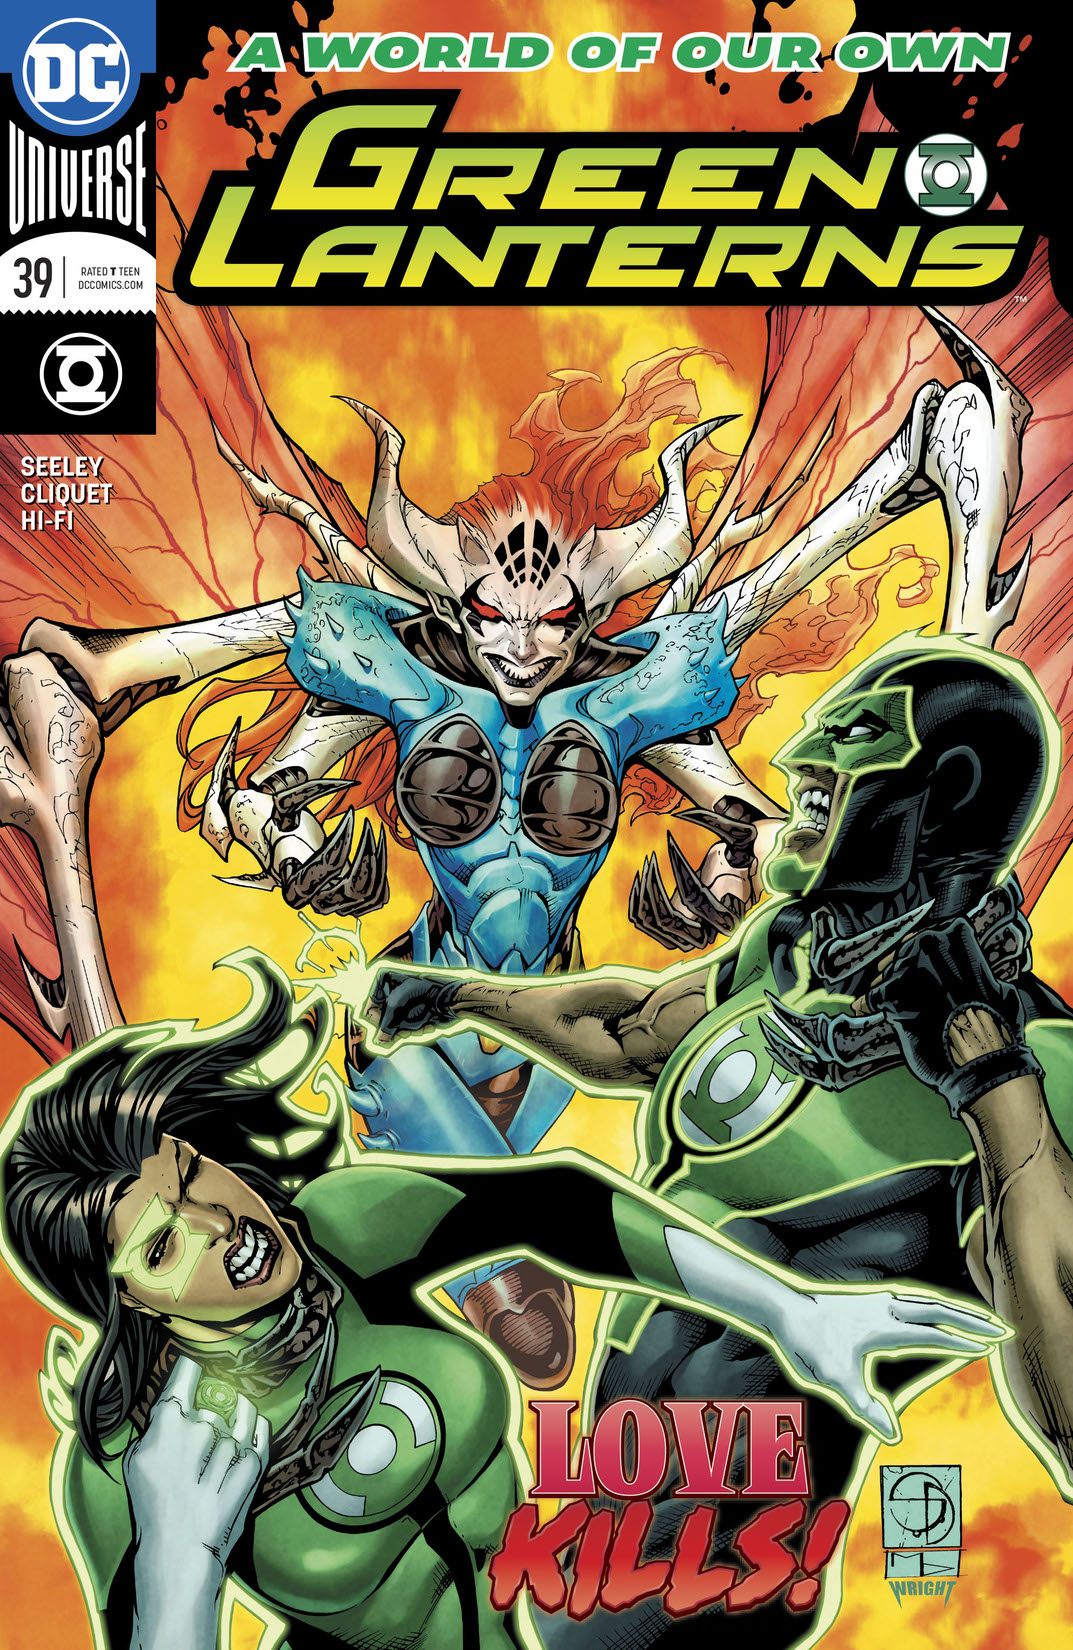 Green Lanterns #39 preview images